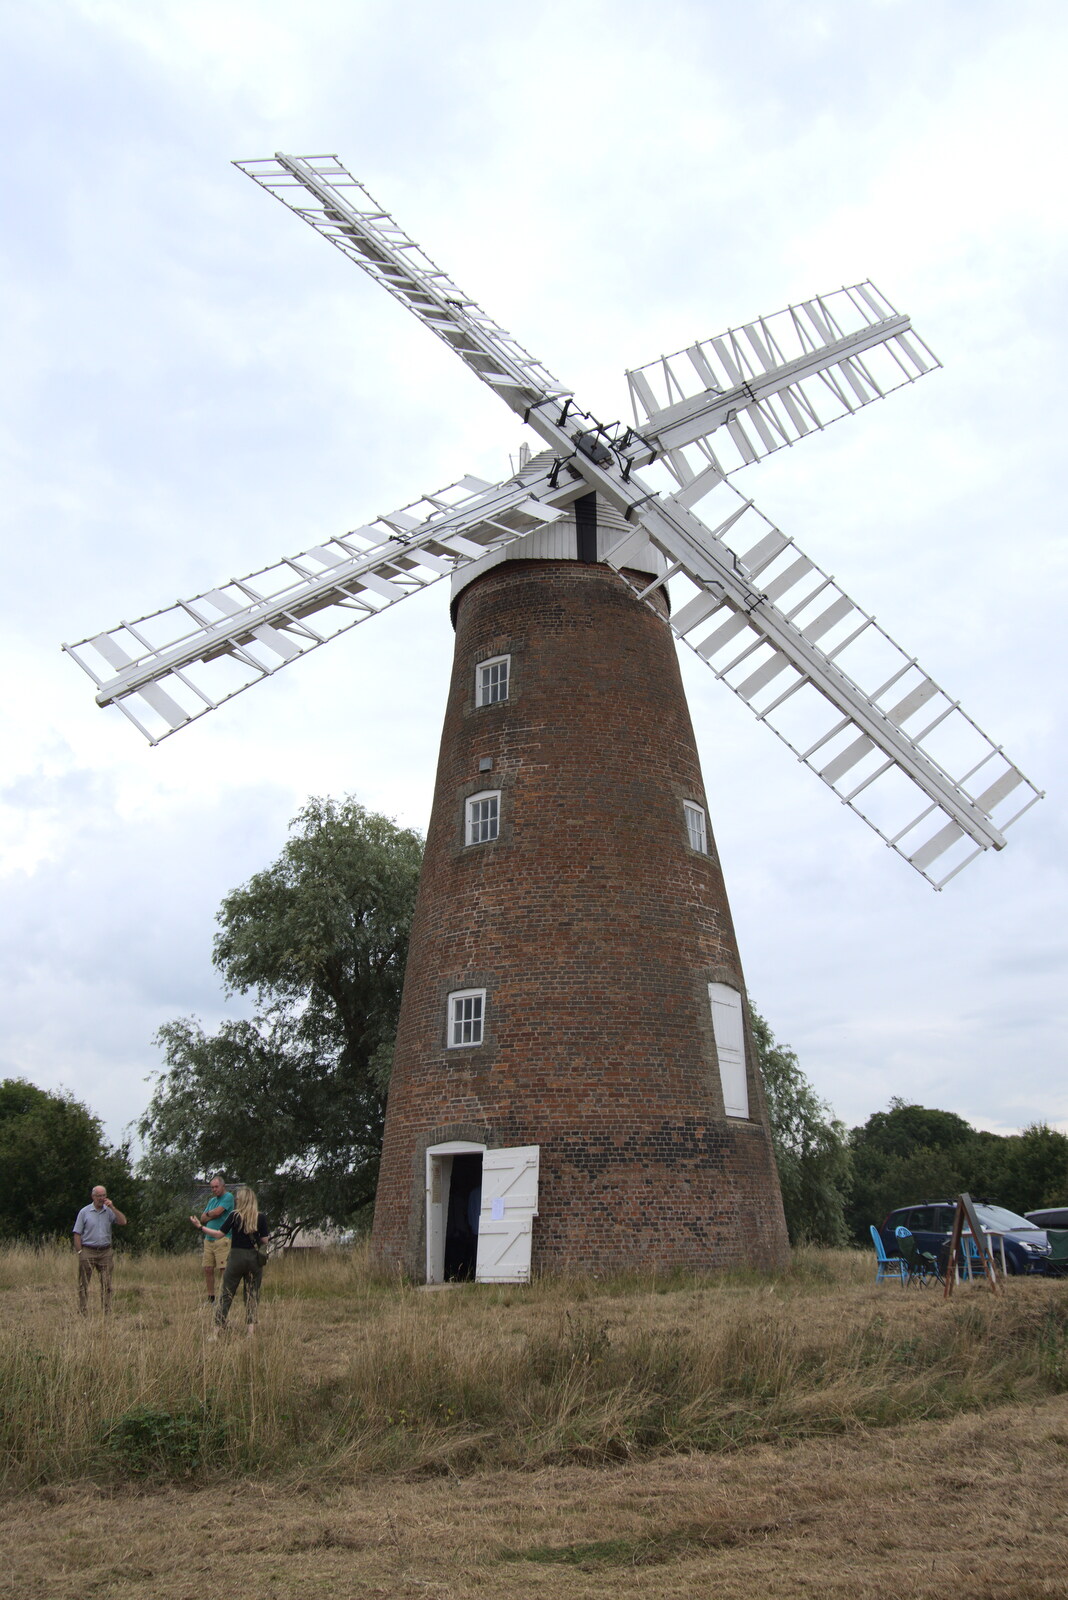 The windmill again from An Open Day at the Windmill, Billingford, Norfolk - 21st August 2021